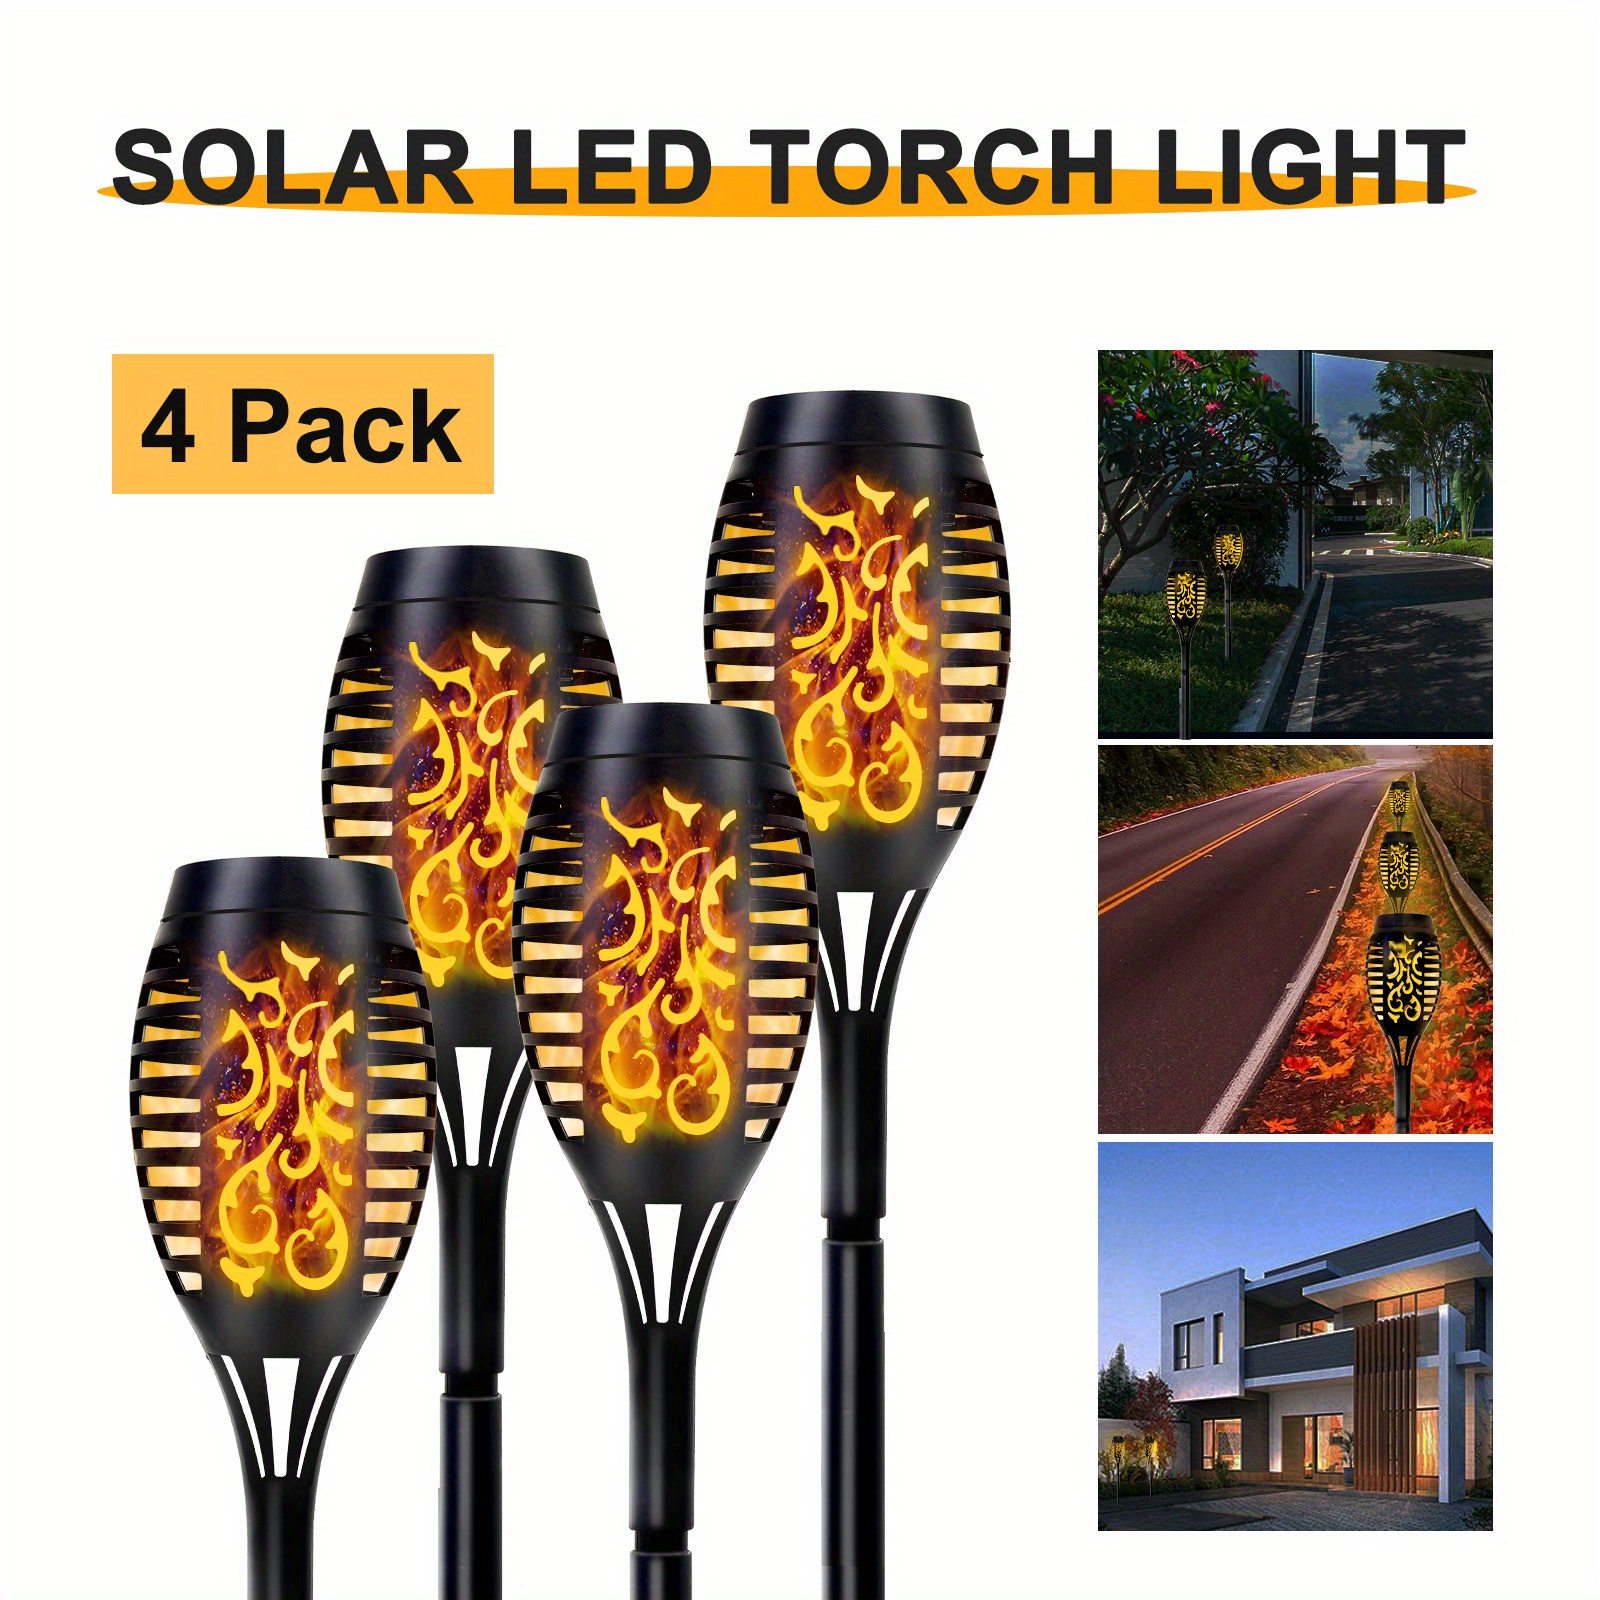 

Solar Torch Lights With Flickering Flame, Solar Flickering Lights, 4-pack Solar Lights Outdoor Waterproof Solar Pathway Lights Landscape Lighting For Garden Lawn Patio Yard Outdoor Decorations